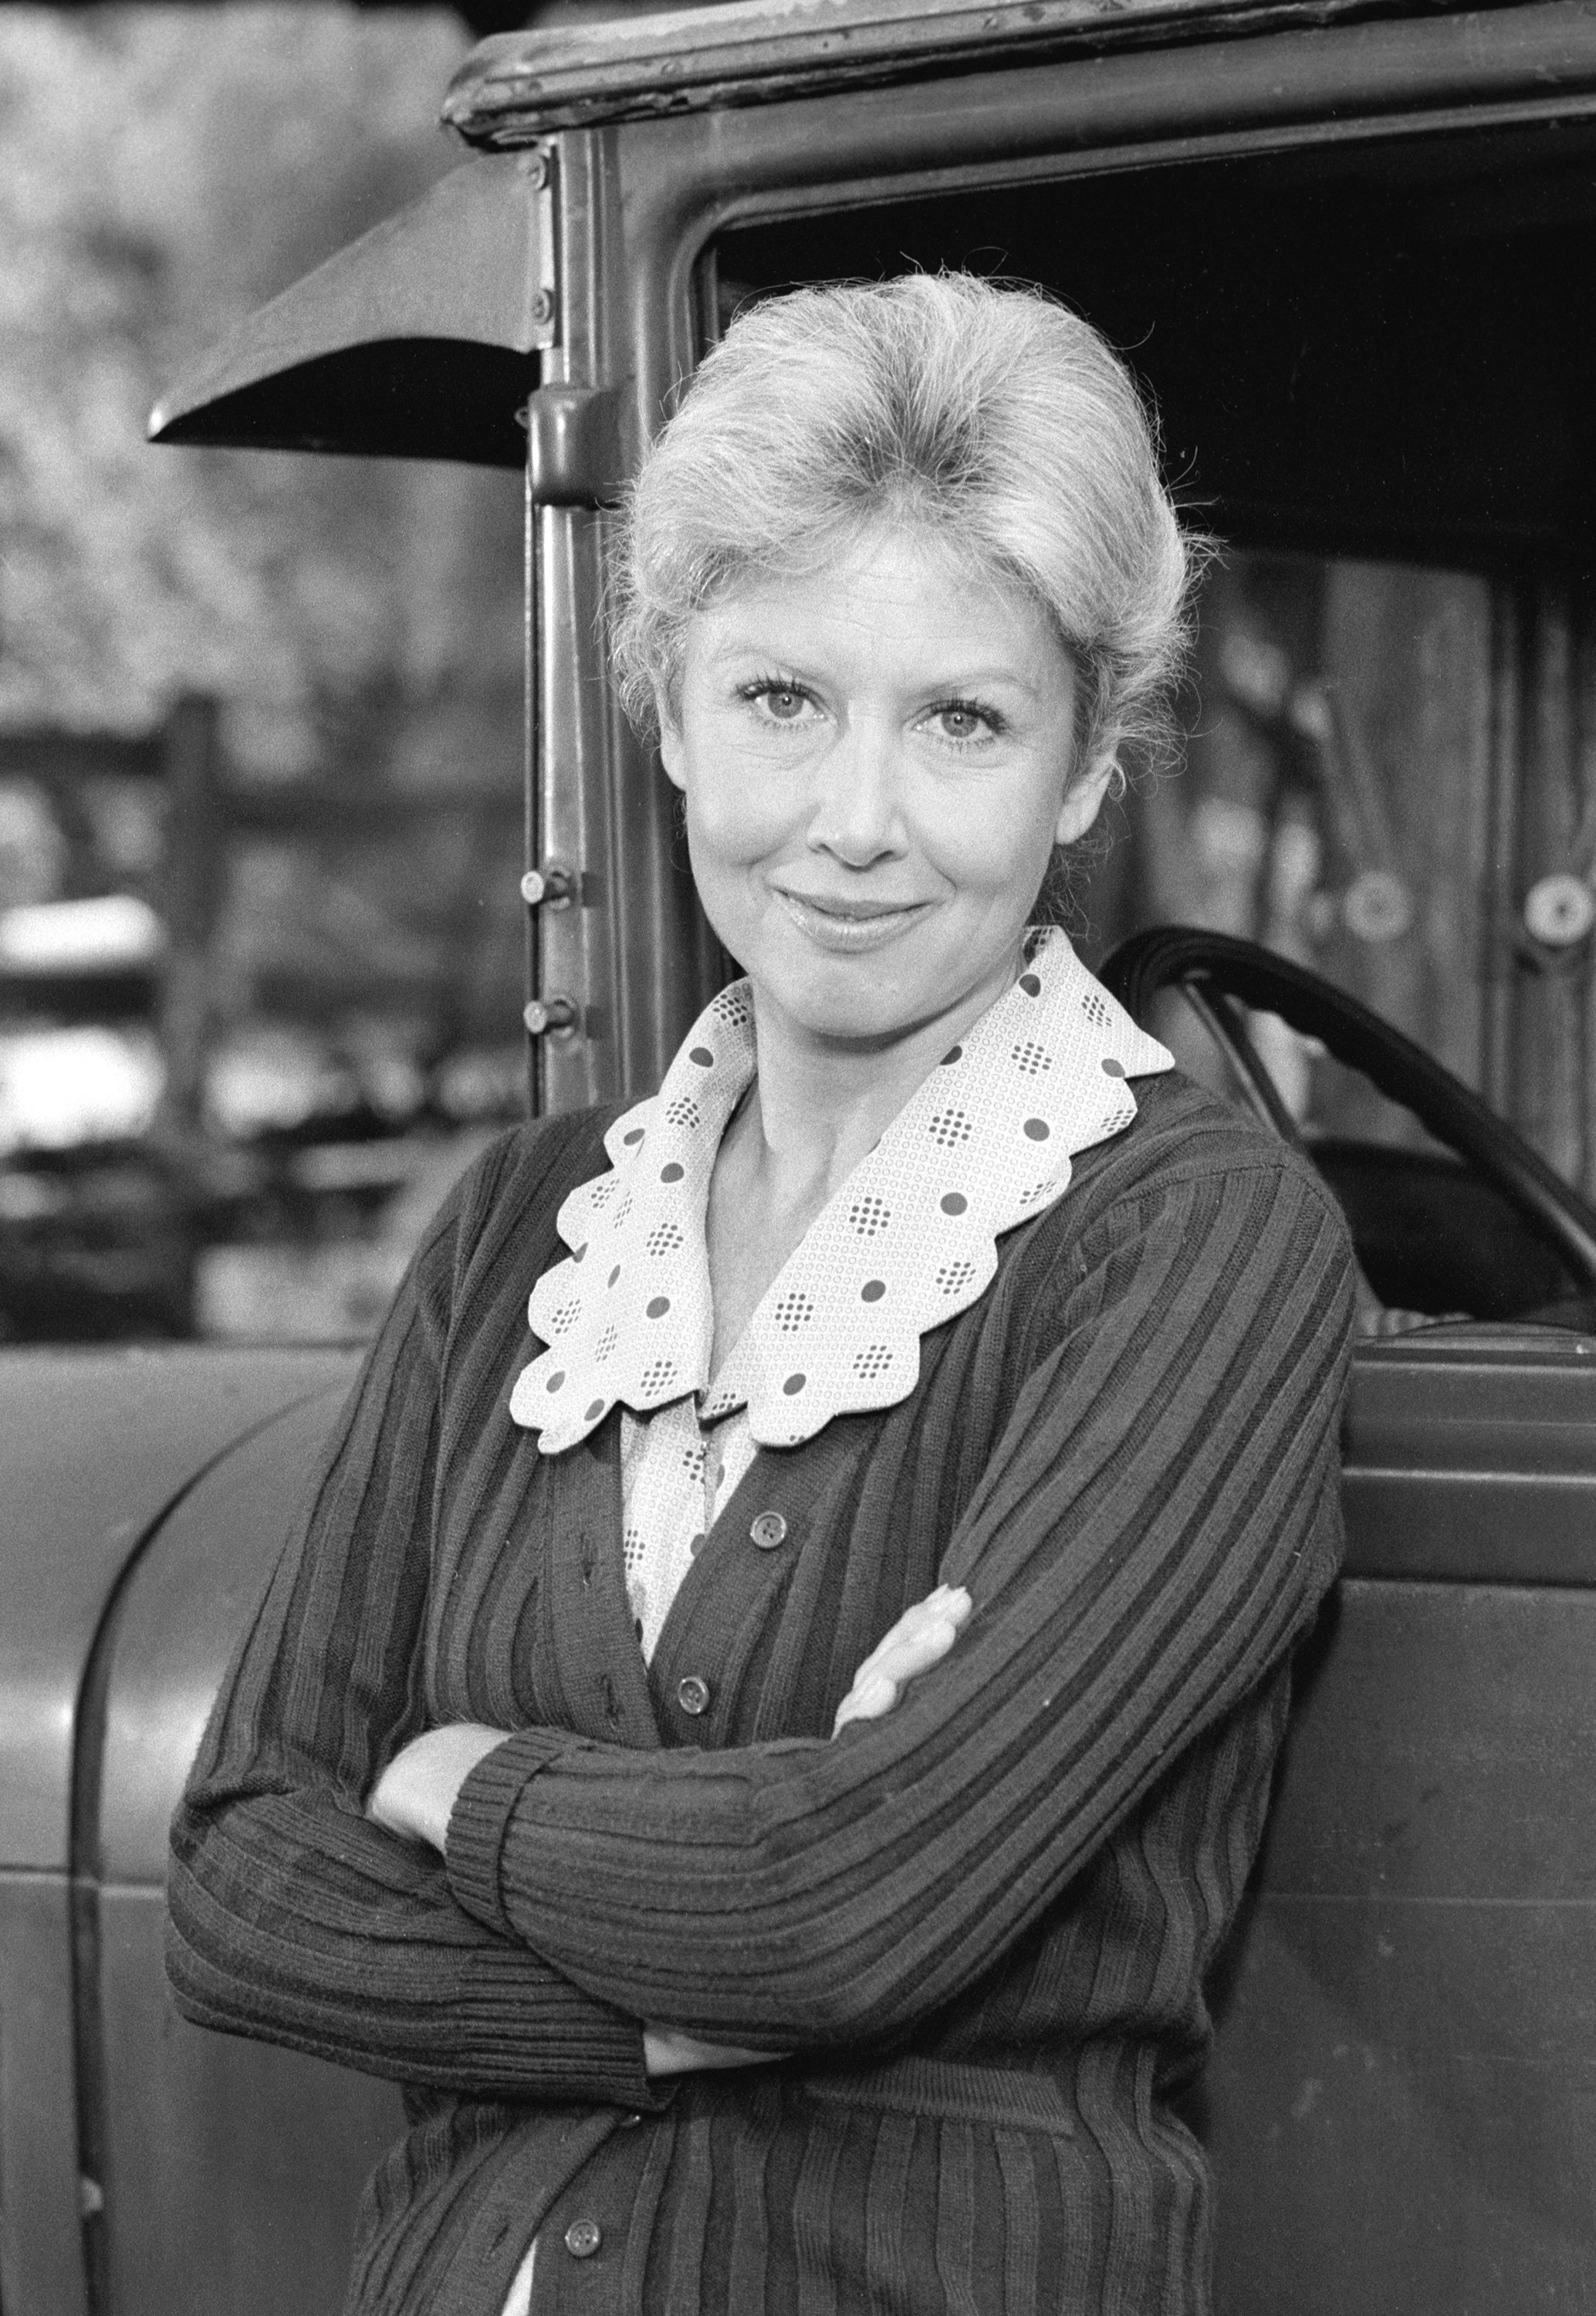 Michael Learned (as Olivia Walton) poses leaning with crossed arms crossed against a truck in an episode of the TV show "The Waltons" on September 20, 1977 ┃Source: Getty Images